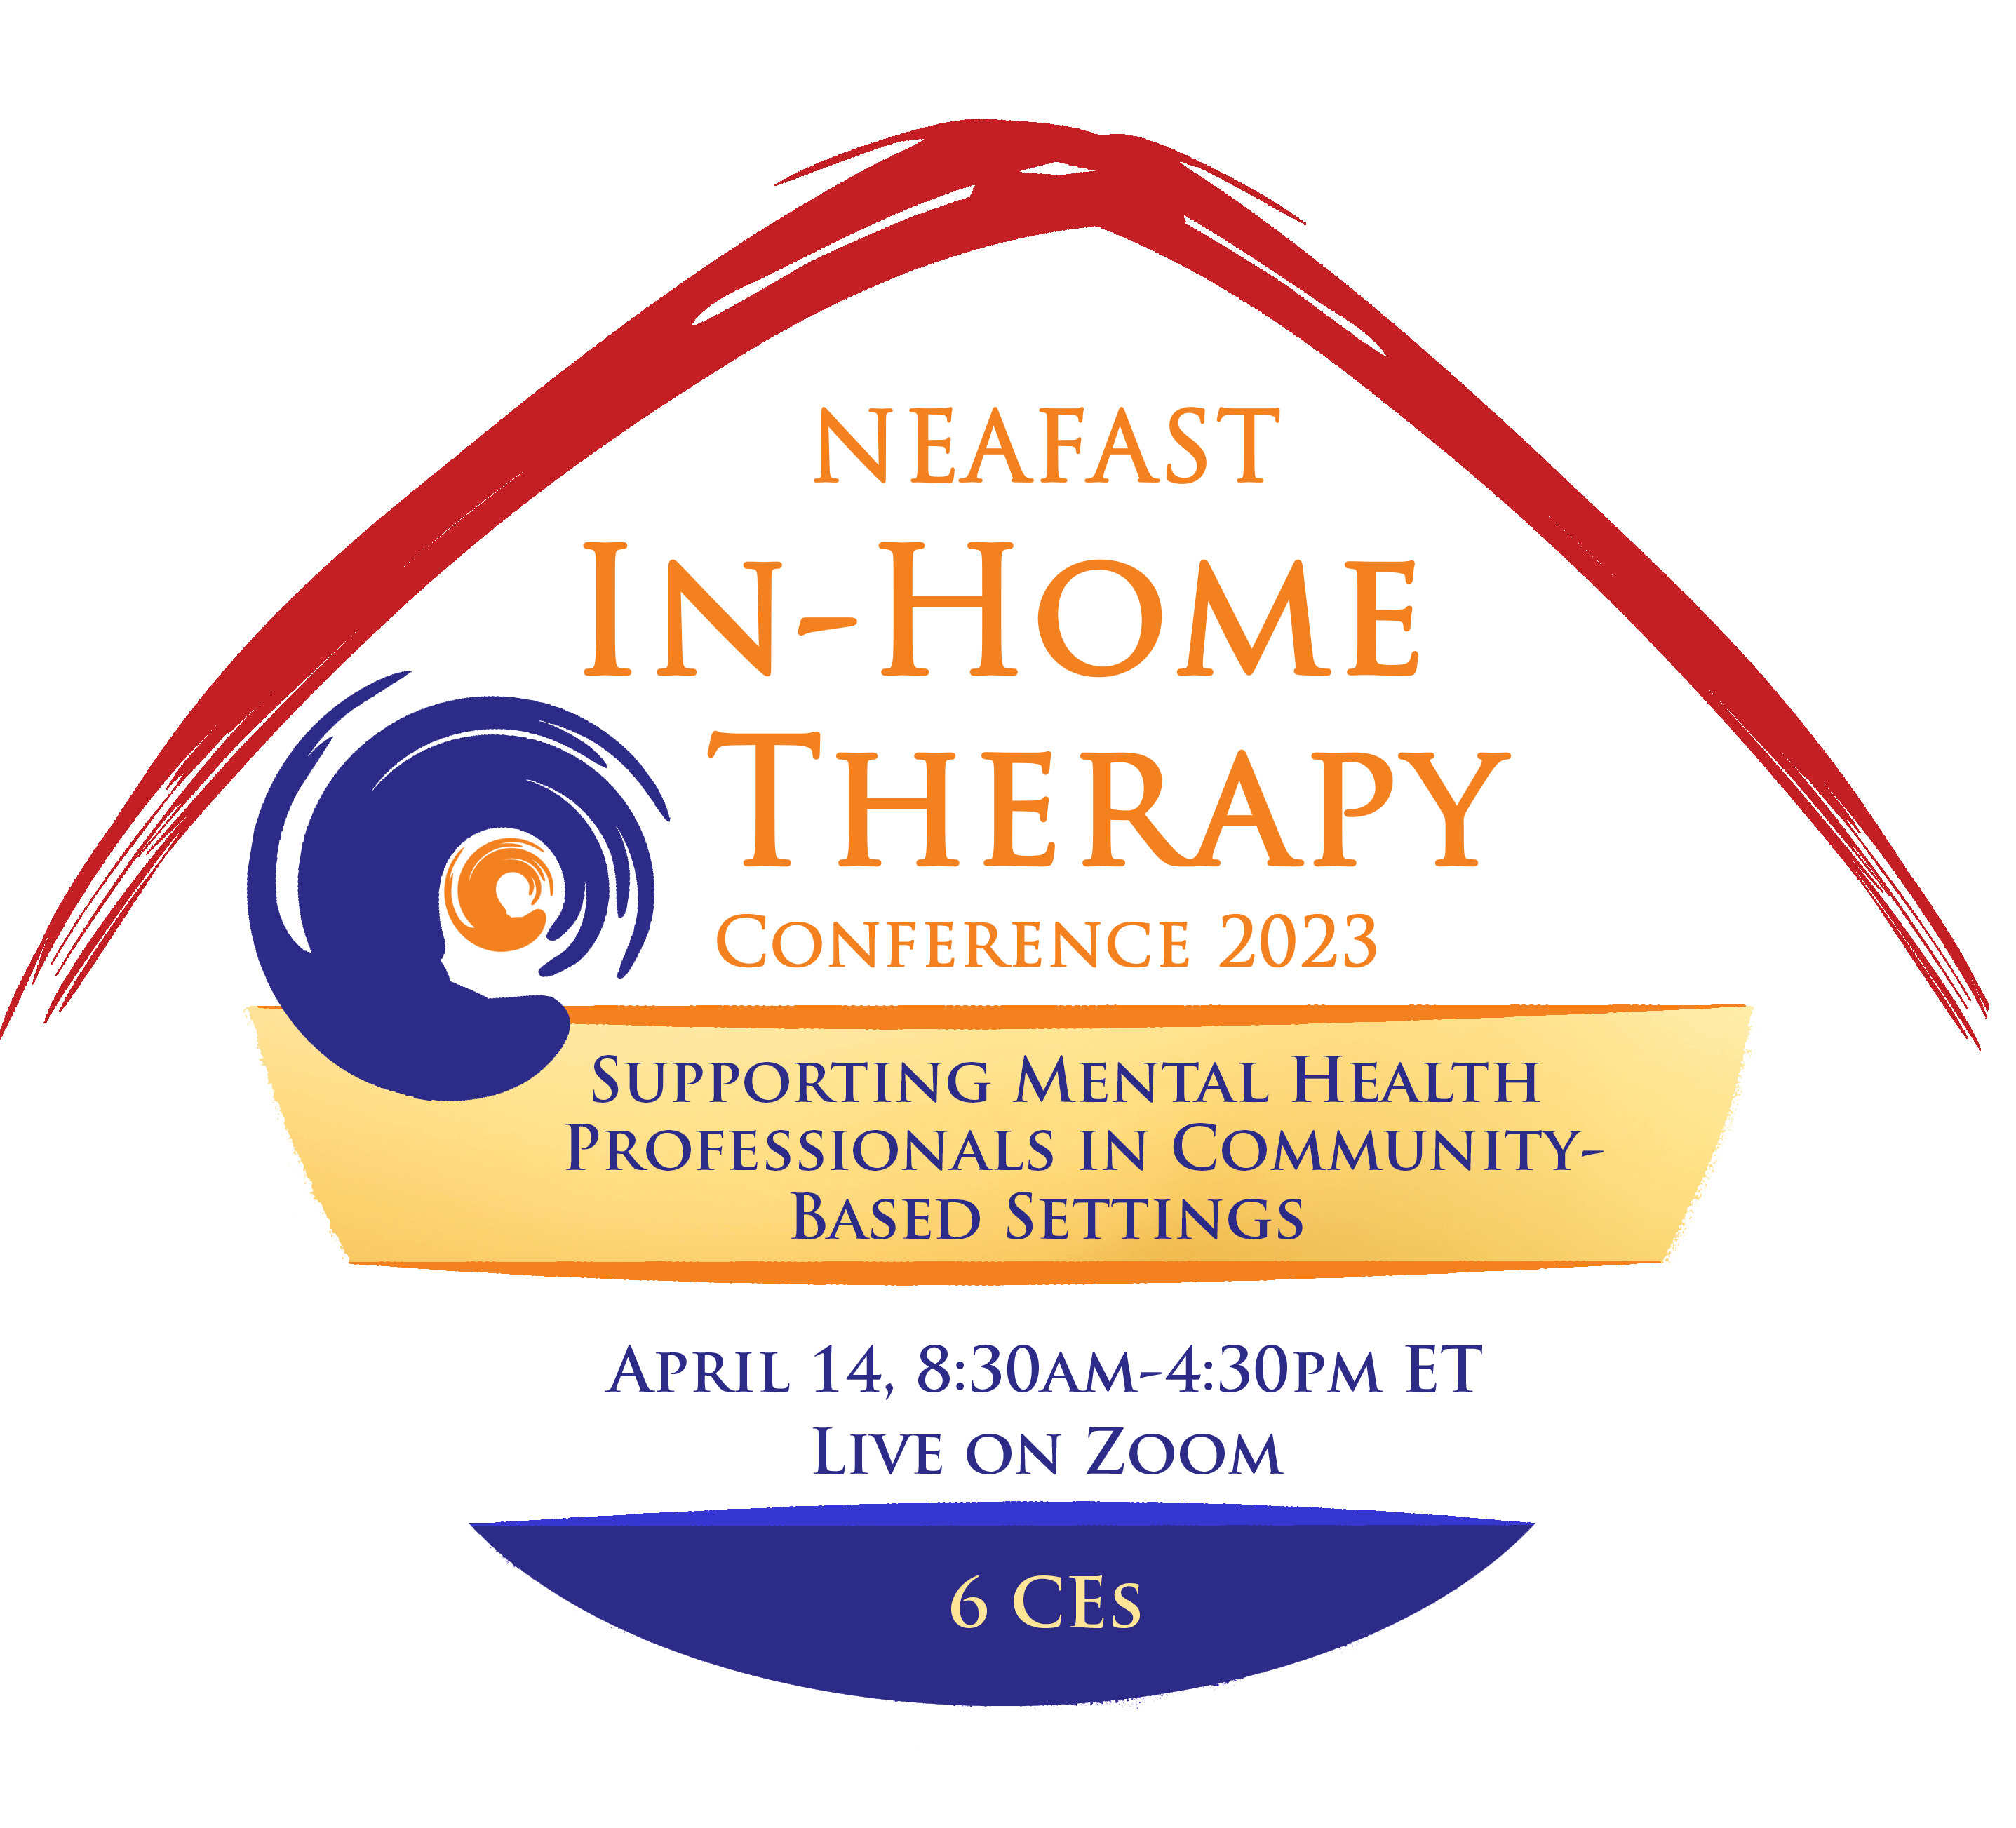 InHome Therapy Conference 2023